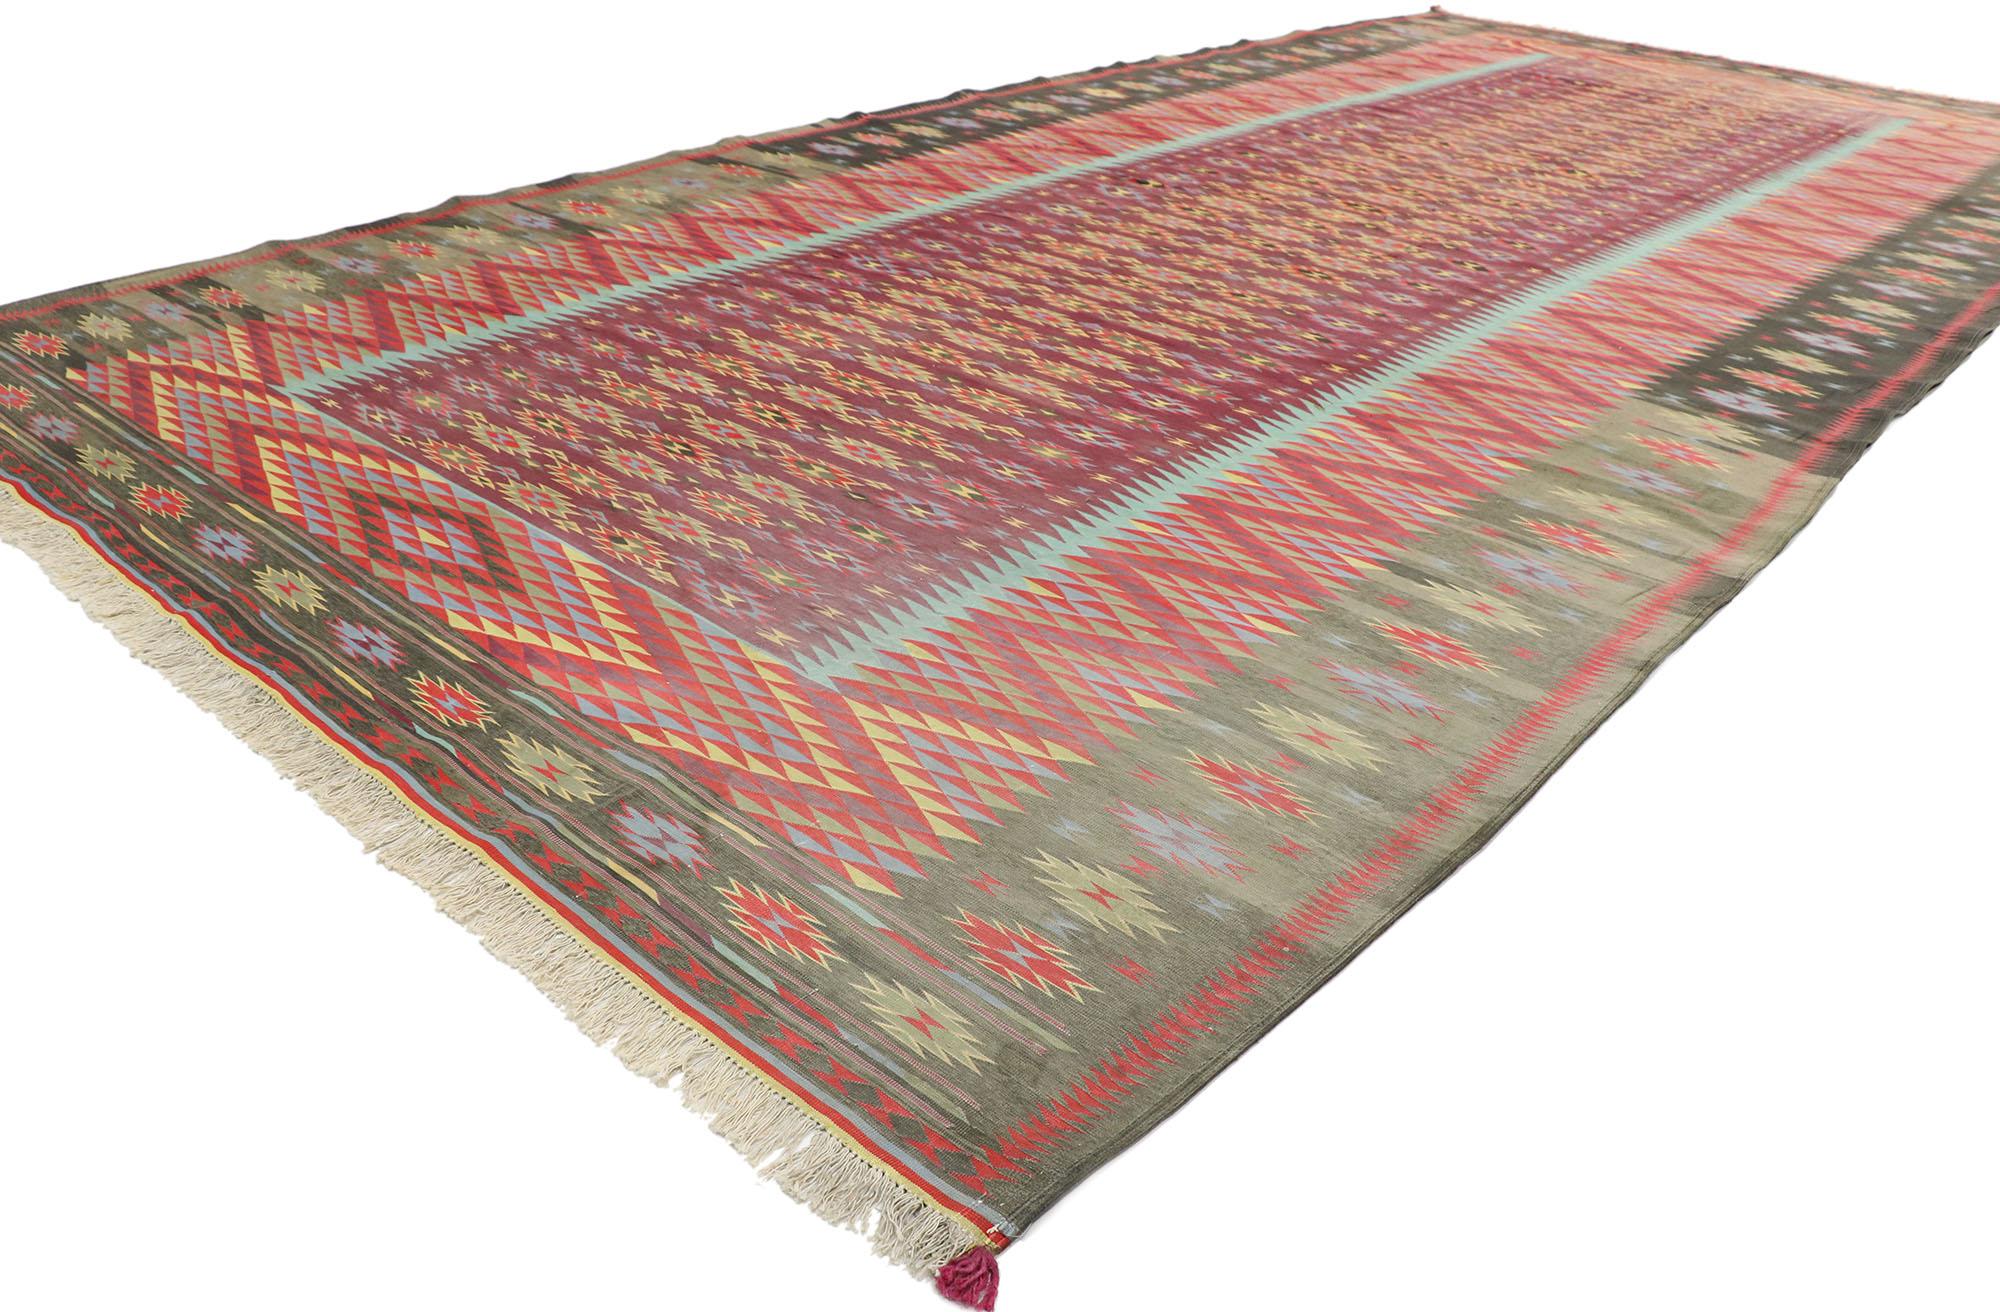 77540 vintage Indian flat-weave Dhurrie room size Kilim rug with Modern Southwestern style. Full of detail and a bold expressive design combined with exuberant colors reminiscent of New Mexico, this hand-woven wool vintage Indian Dhurrie room size